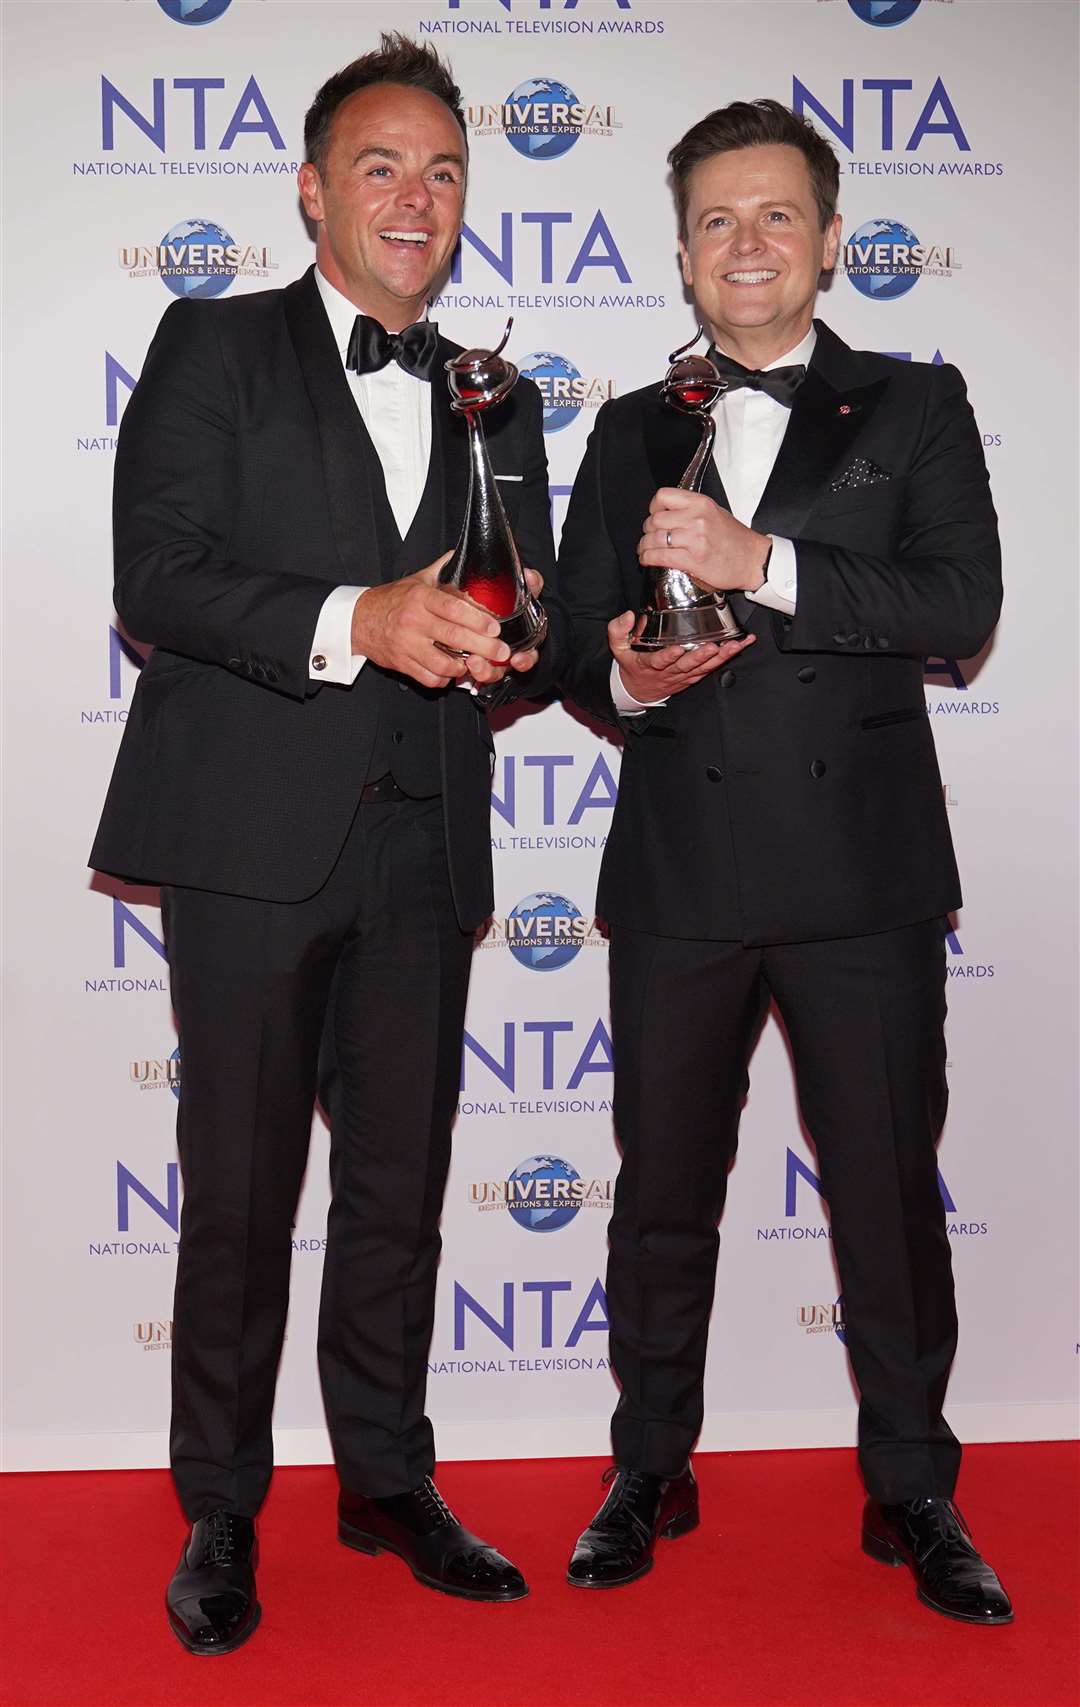 Ant McPartlin and Declan Donnelly winners of the TV Presenter award at the National Television Awards (Lucy North/PA)